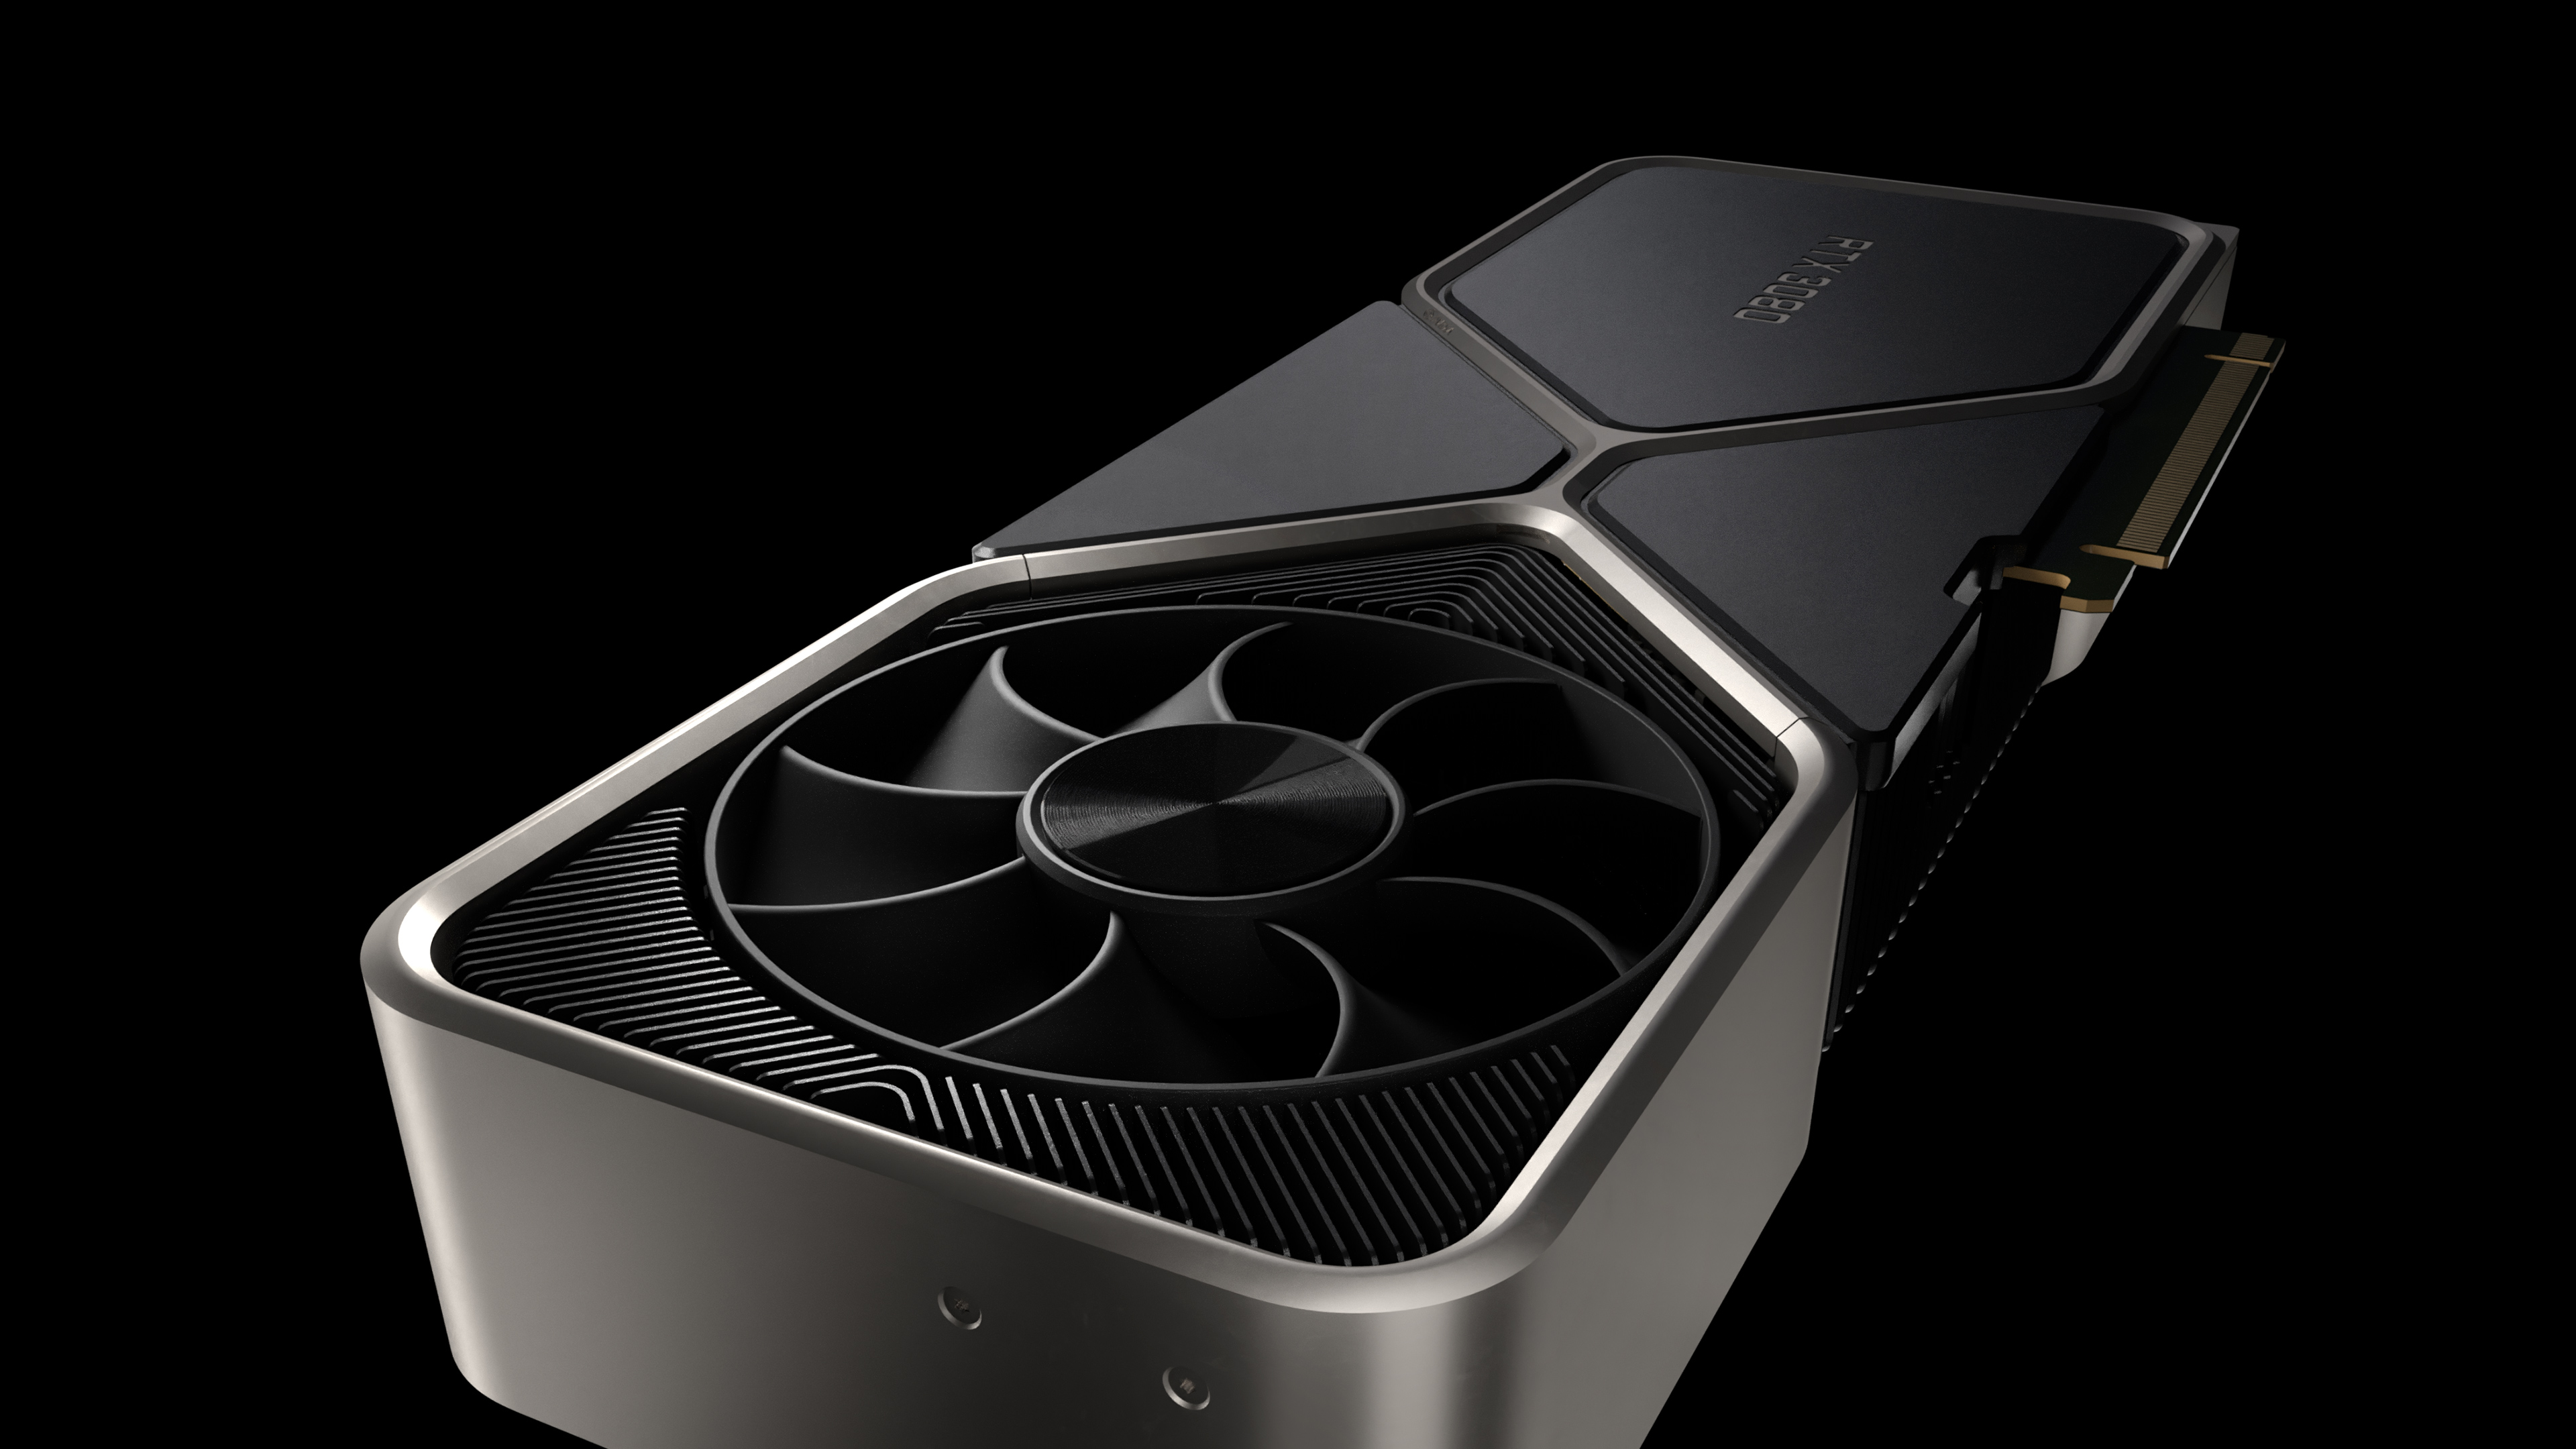 Nvidia's monstrous new graphics cards 